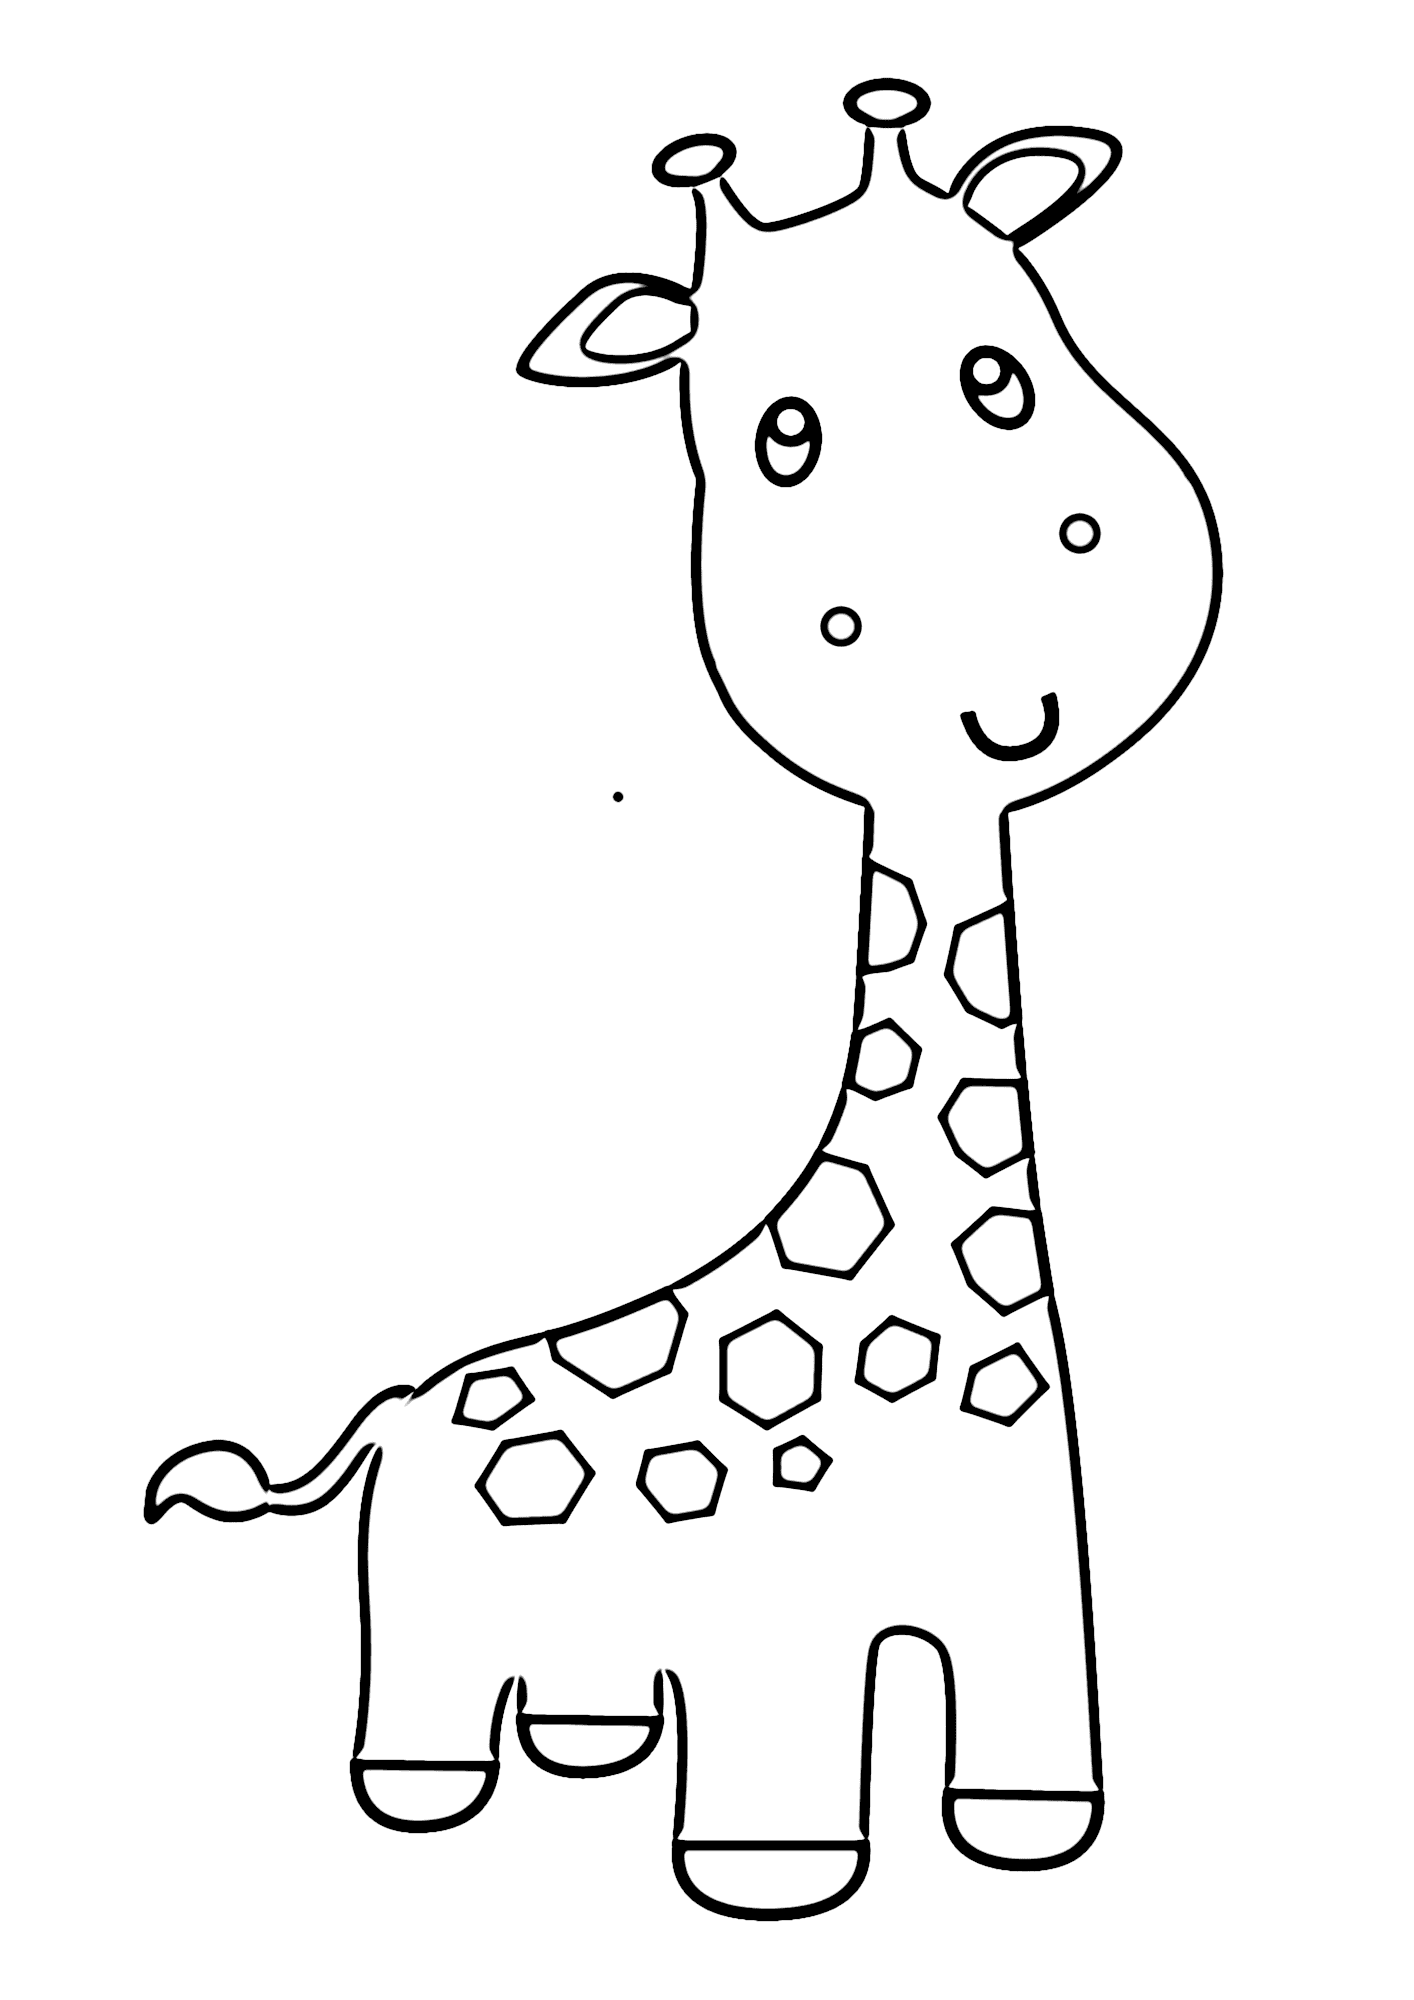 Giraffe For Kids Picture Coloring Page